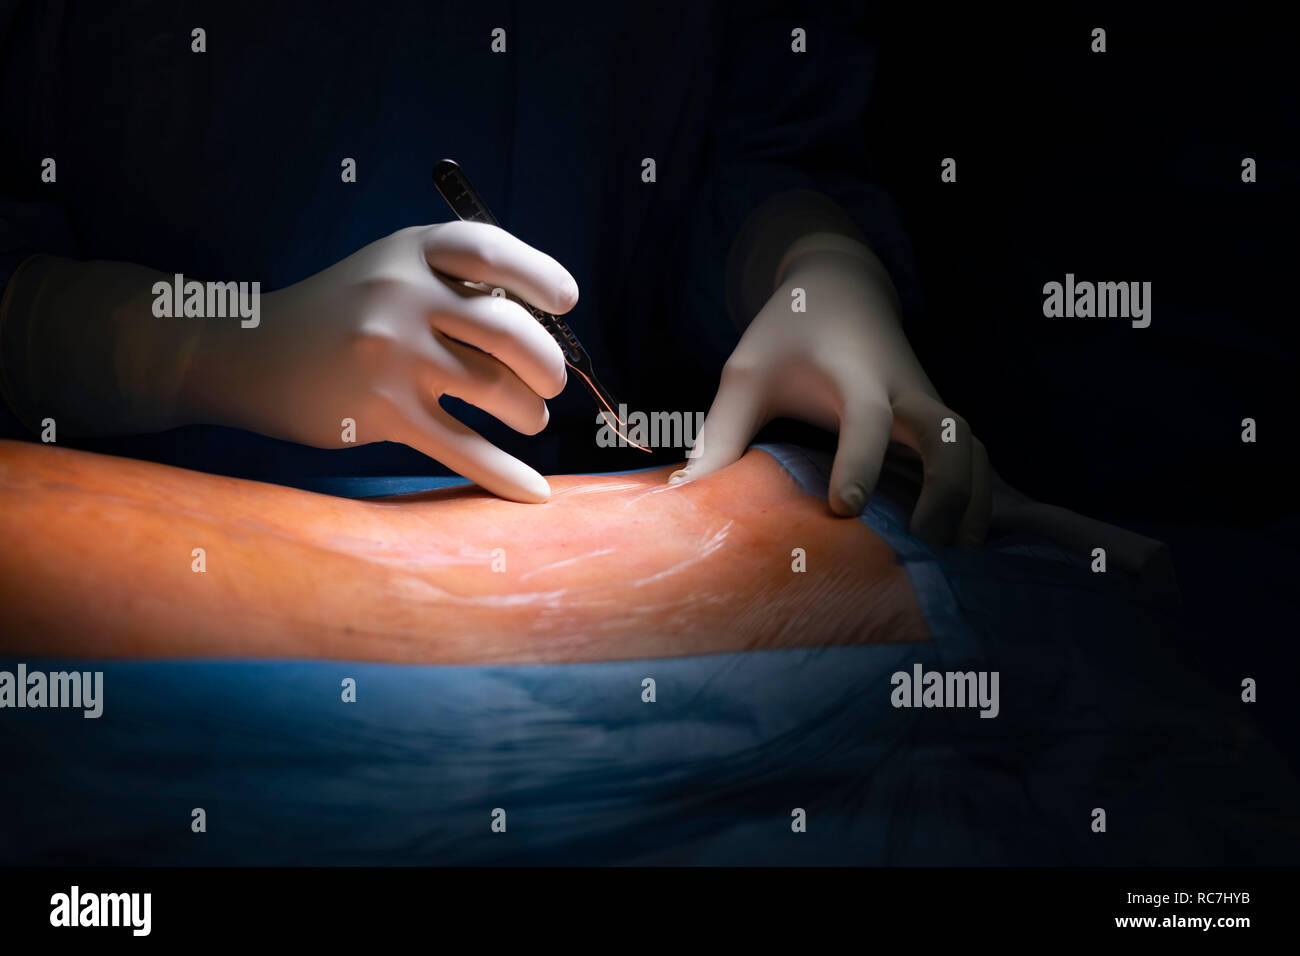 Detail of surgeon waiting to perform the first cut with a scalpel during a surgery at the hospital operating room Stock Photo